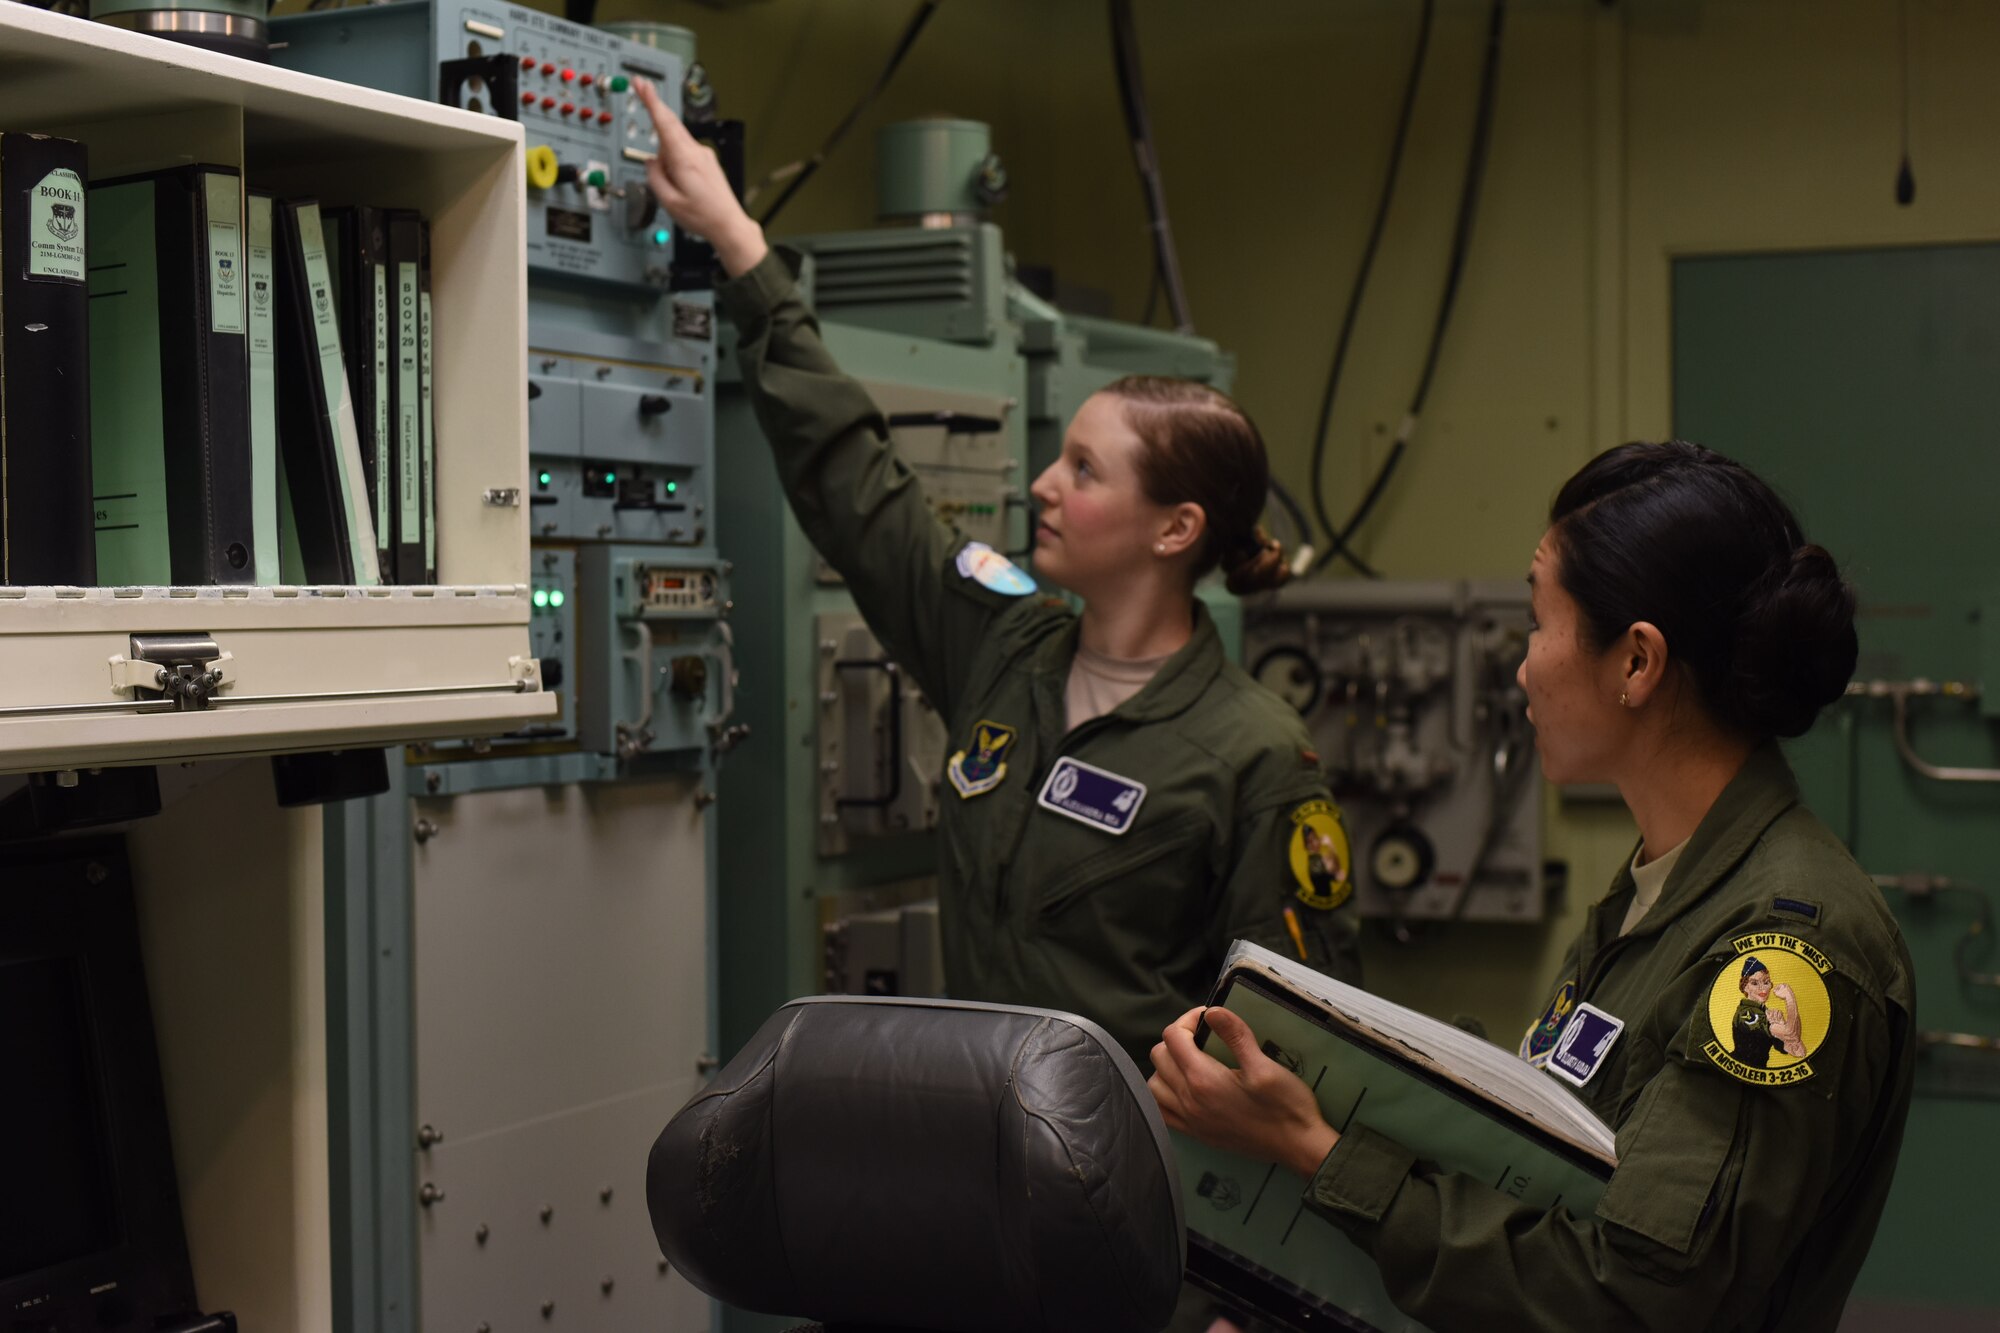 2nd Lt. Alexandra Rea, 490th Missile Squadron ICBM combat crew deputy director, left, and 1st Lt. Elizabeth Guidara, 12th Missile Squadron combat crew deputy director, perform training at the Malmstrom Air Force Base, Mont., missile procedures trainer March 21, 2016. During their assignment, the all-female crews of missileers maintained a 24-hour alert shift to sustain an active alert status of our nation’s intercontinental ballistic missile force. (U.S. Air Force photo/Airman Collin Schmidt)